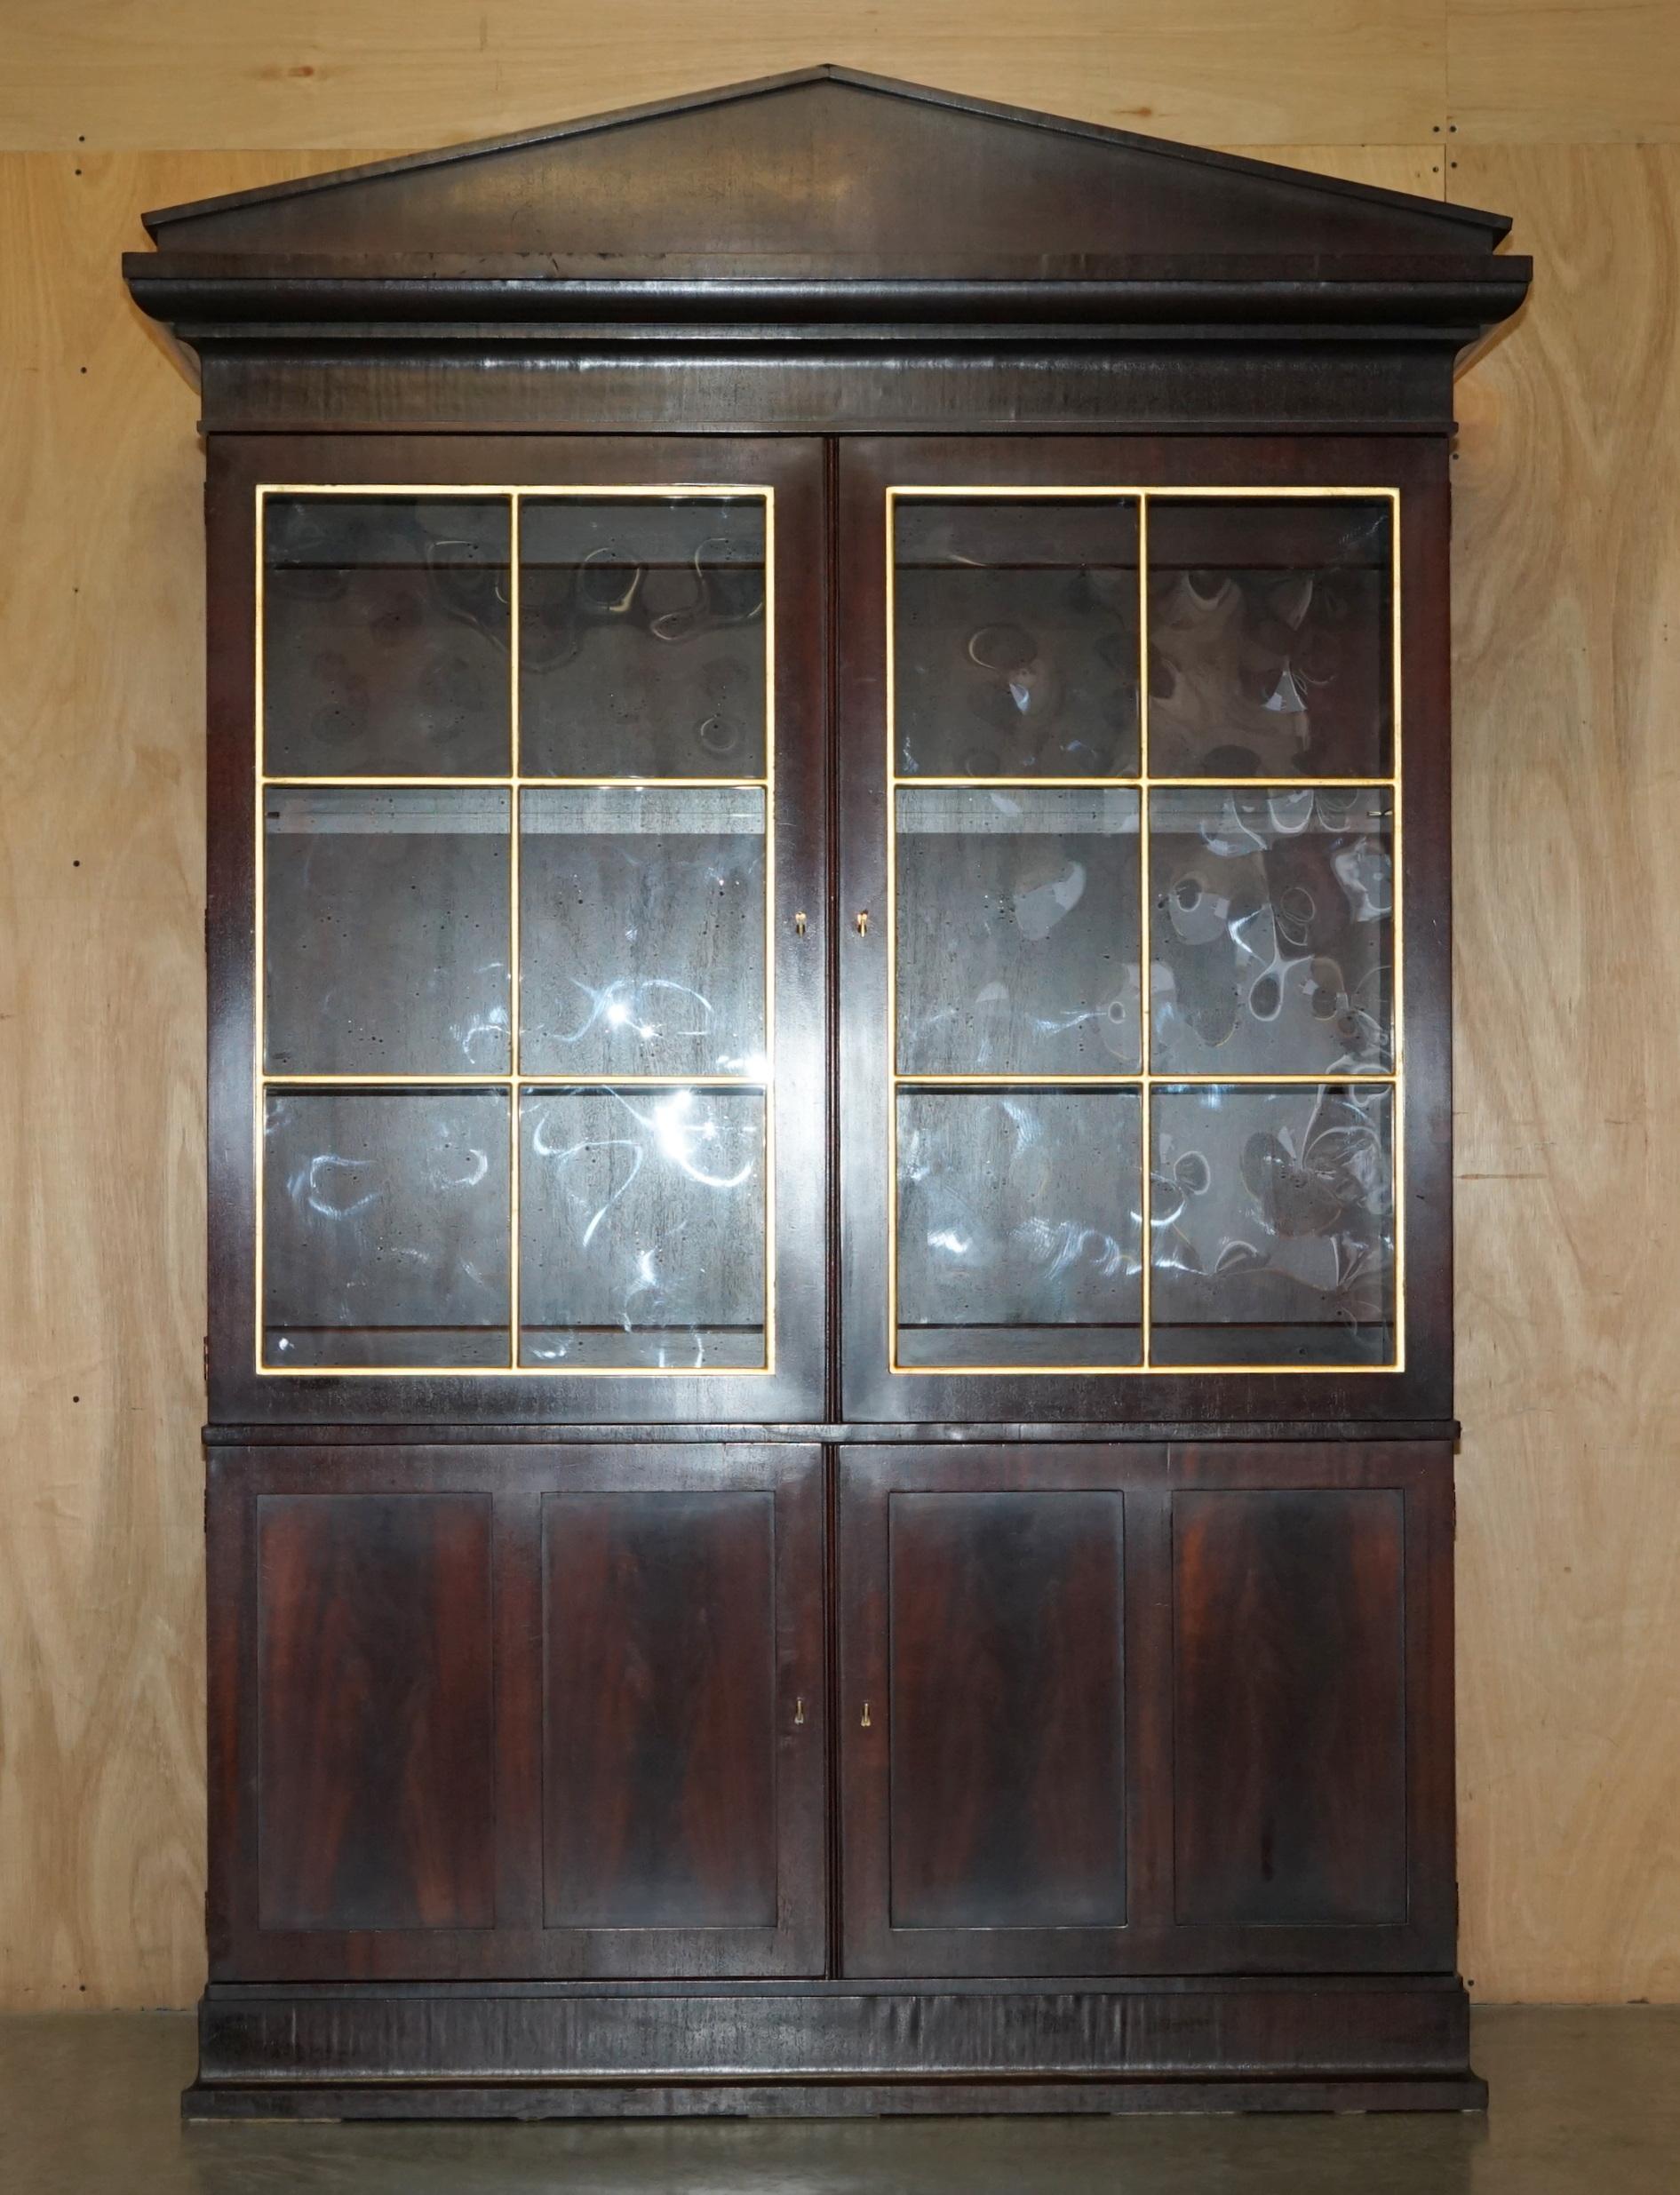 Royal House Antiques

Royal House Antiques is delighted to offer for sale this absolutely exquisite, Flamed American Mahogany, extra large display cabinet designed by Ralph Lauren and retailed through Henredon

Please note the delivery fee listed is